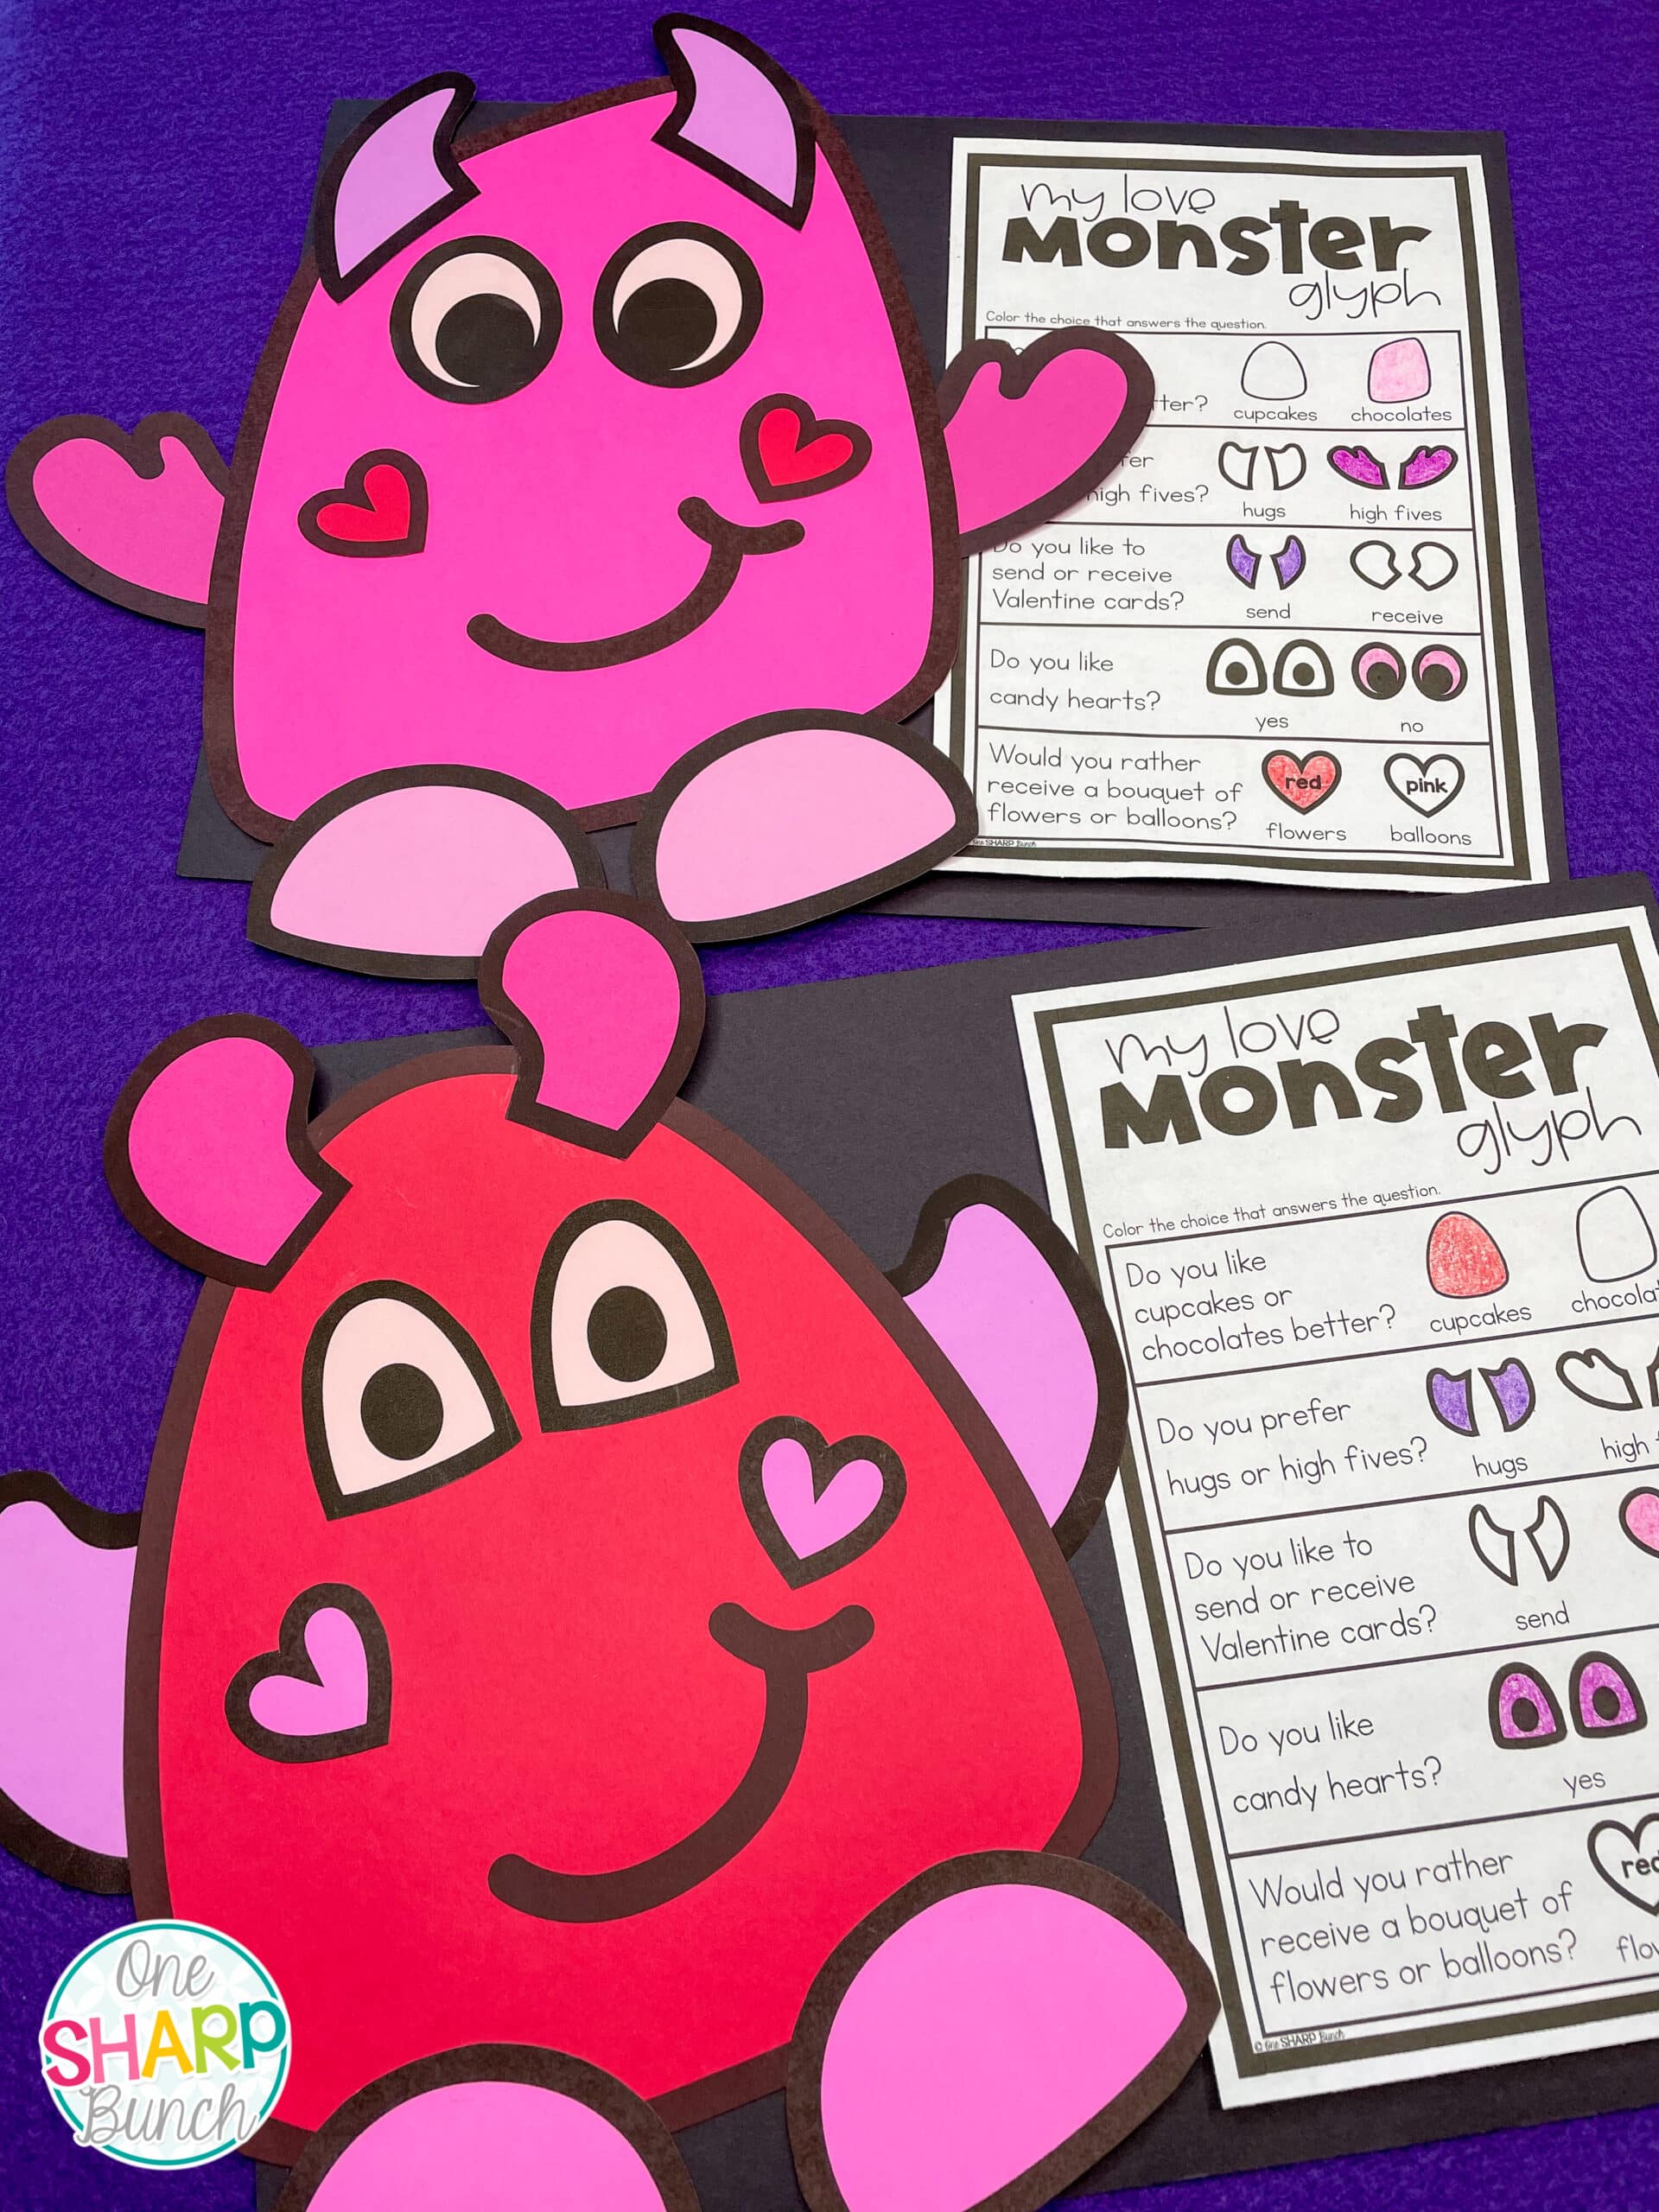 Keep your little lovebugs distanced, yet engaged, and your classroom Valentine’s Day party well-managed with these social distancing Valentine’s Day party ideas for the classroom, including Valentine’s Day crafts, Valentine’s Day games and Valentine’s treats! These no contact Valentine’s Day party activities are sure to be a lovely hit this February! #winter #valentinesday #valentinesdaypartyideas #classroomvalentinesdayparty #diyvalentines #diyvalentinesdayparty #valentinecrafts #valentinegames #valentinestreats #winteractivities